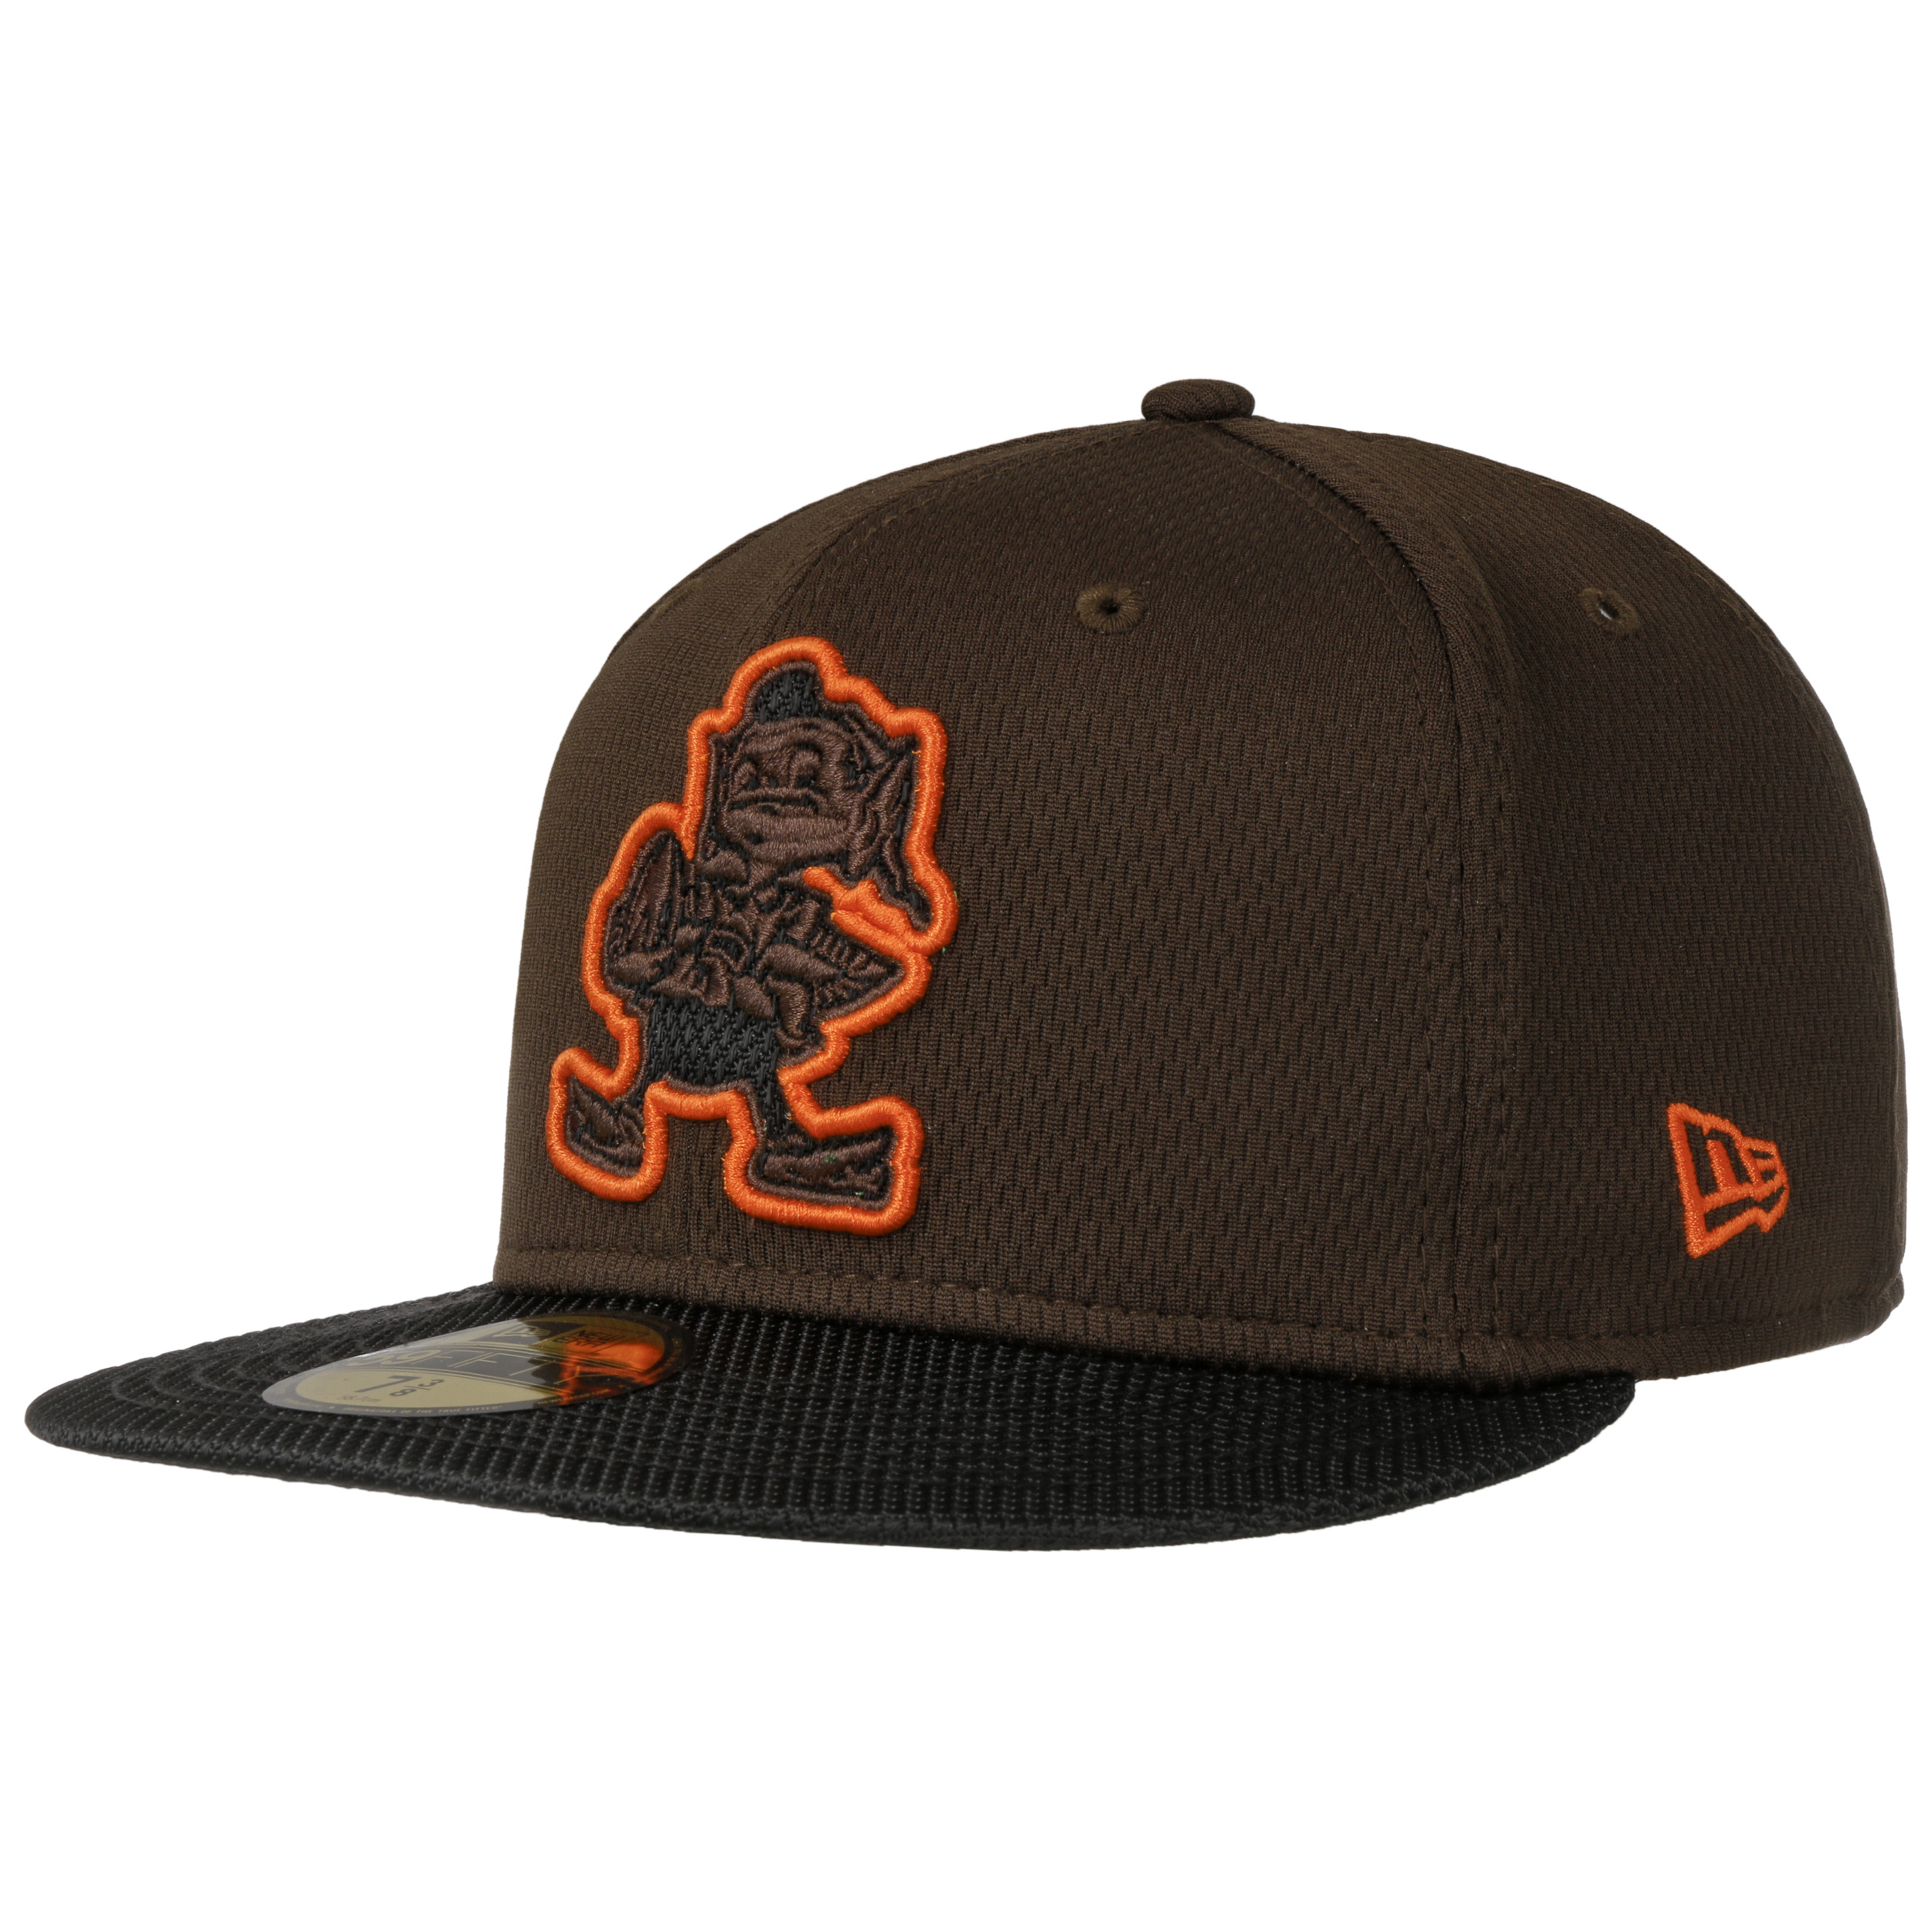 59Fifty Sideline 21 Browns Cap by New Era